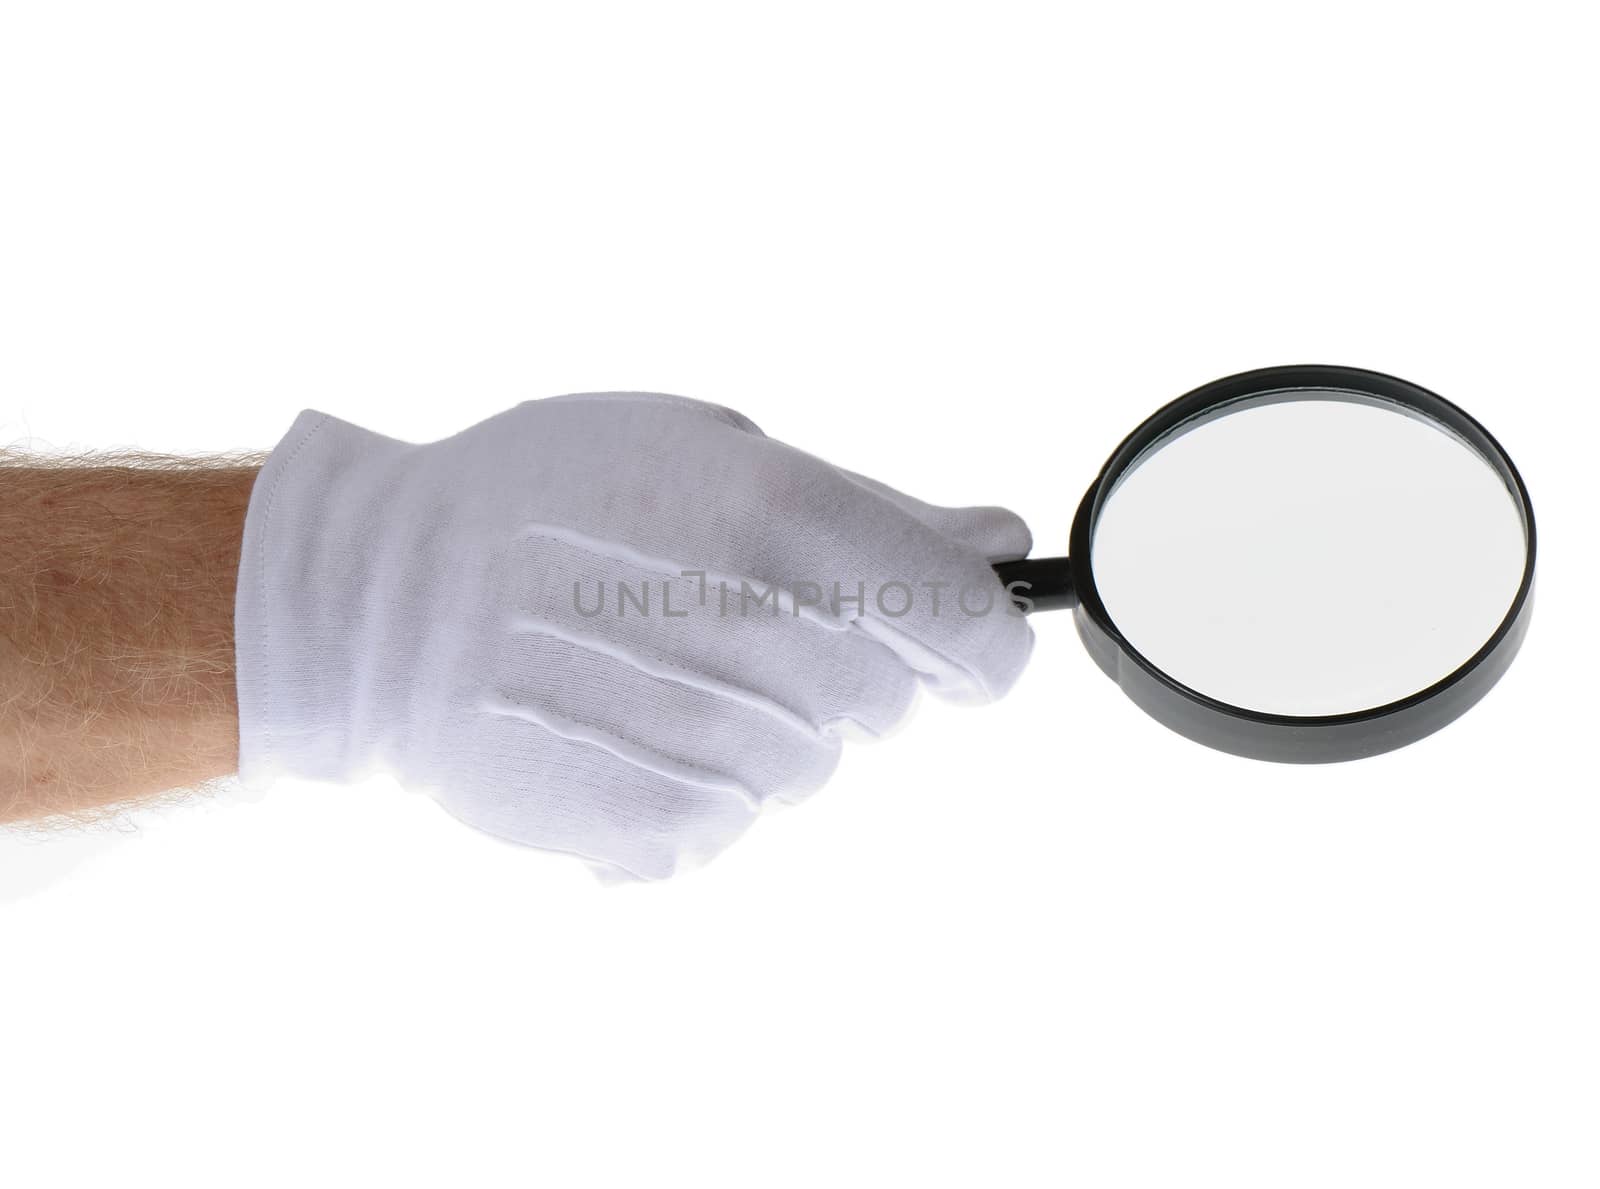 White glove holding a magnifying glass isolated on white